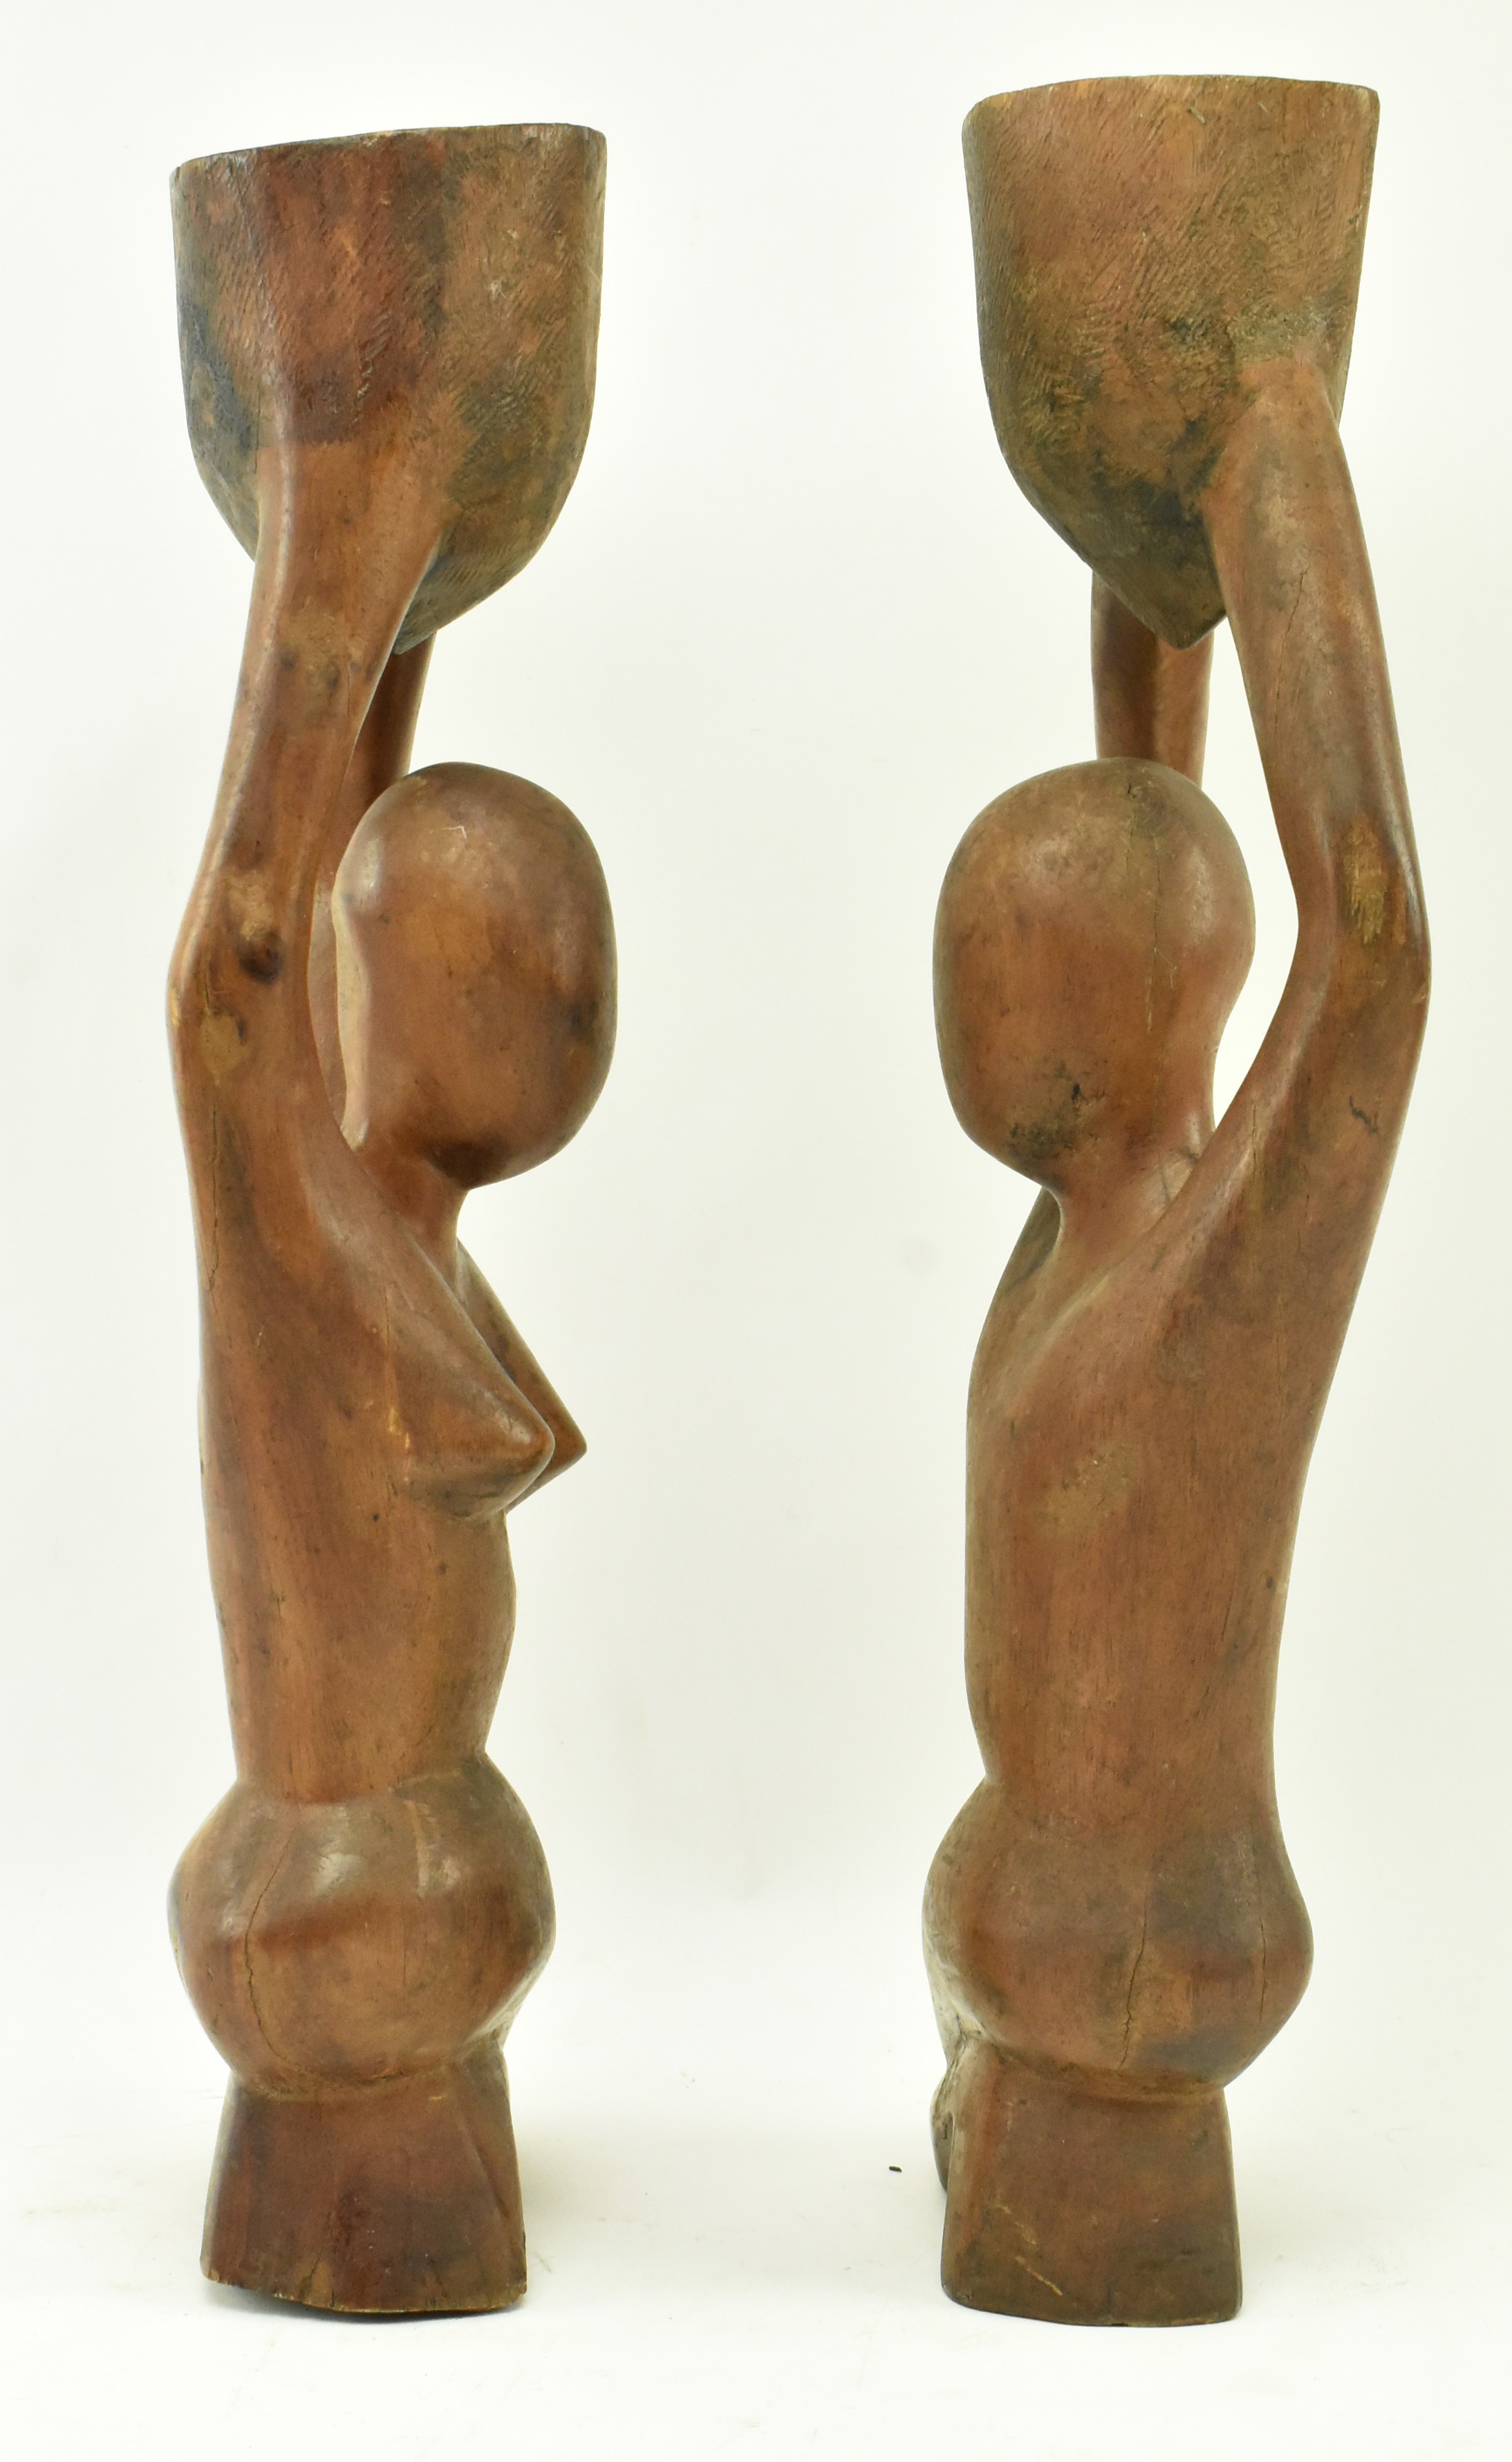 PAIR OF HAND CARVED WOOD DECORATIVE FIGURES STANDS - Image 2 of 6